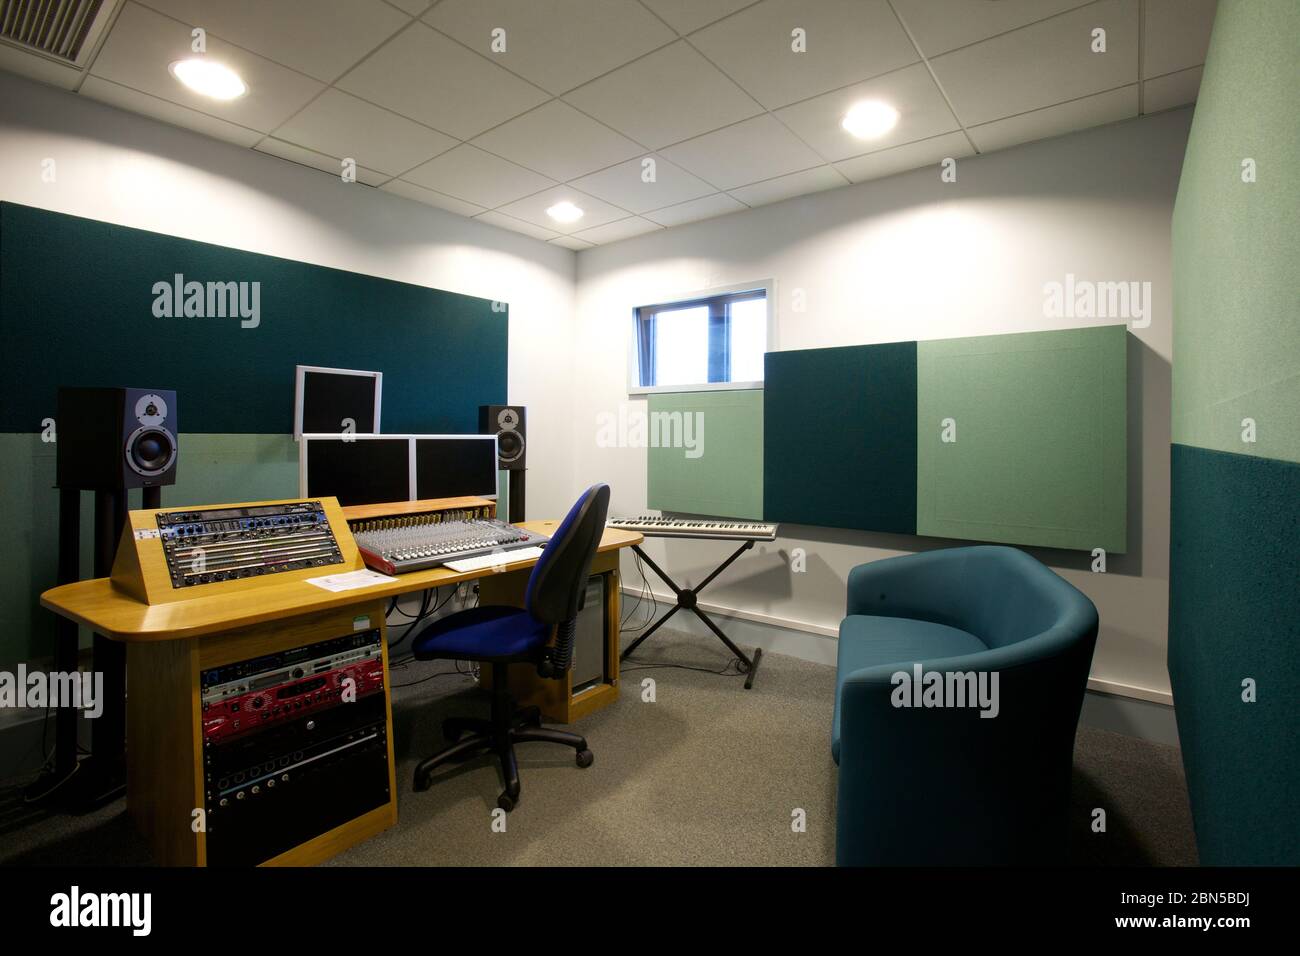 Sound studio with speakers, monitors, a sound board and sound absorbers on the walls, Stock Photo